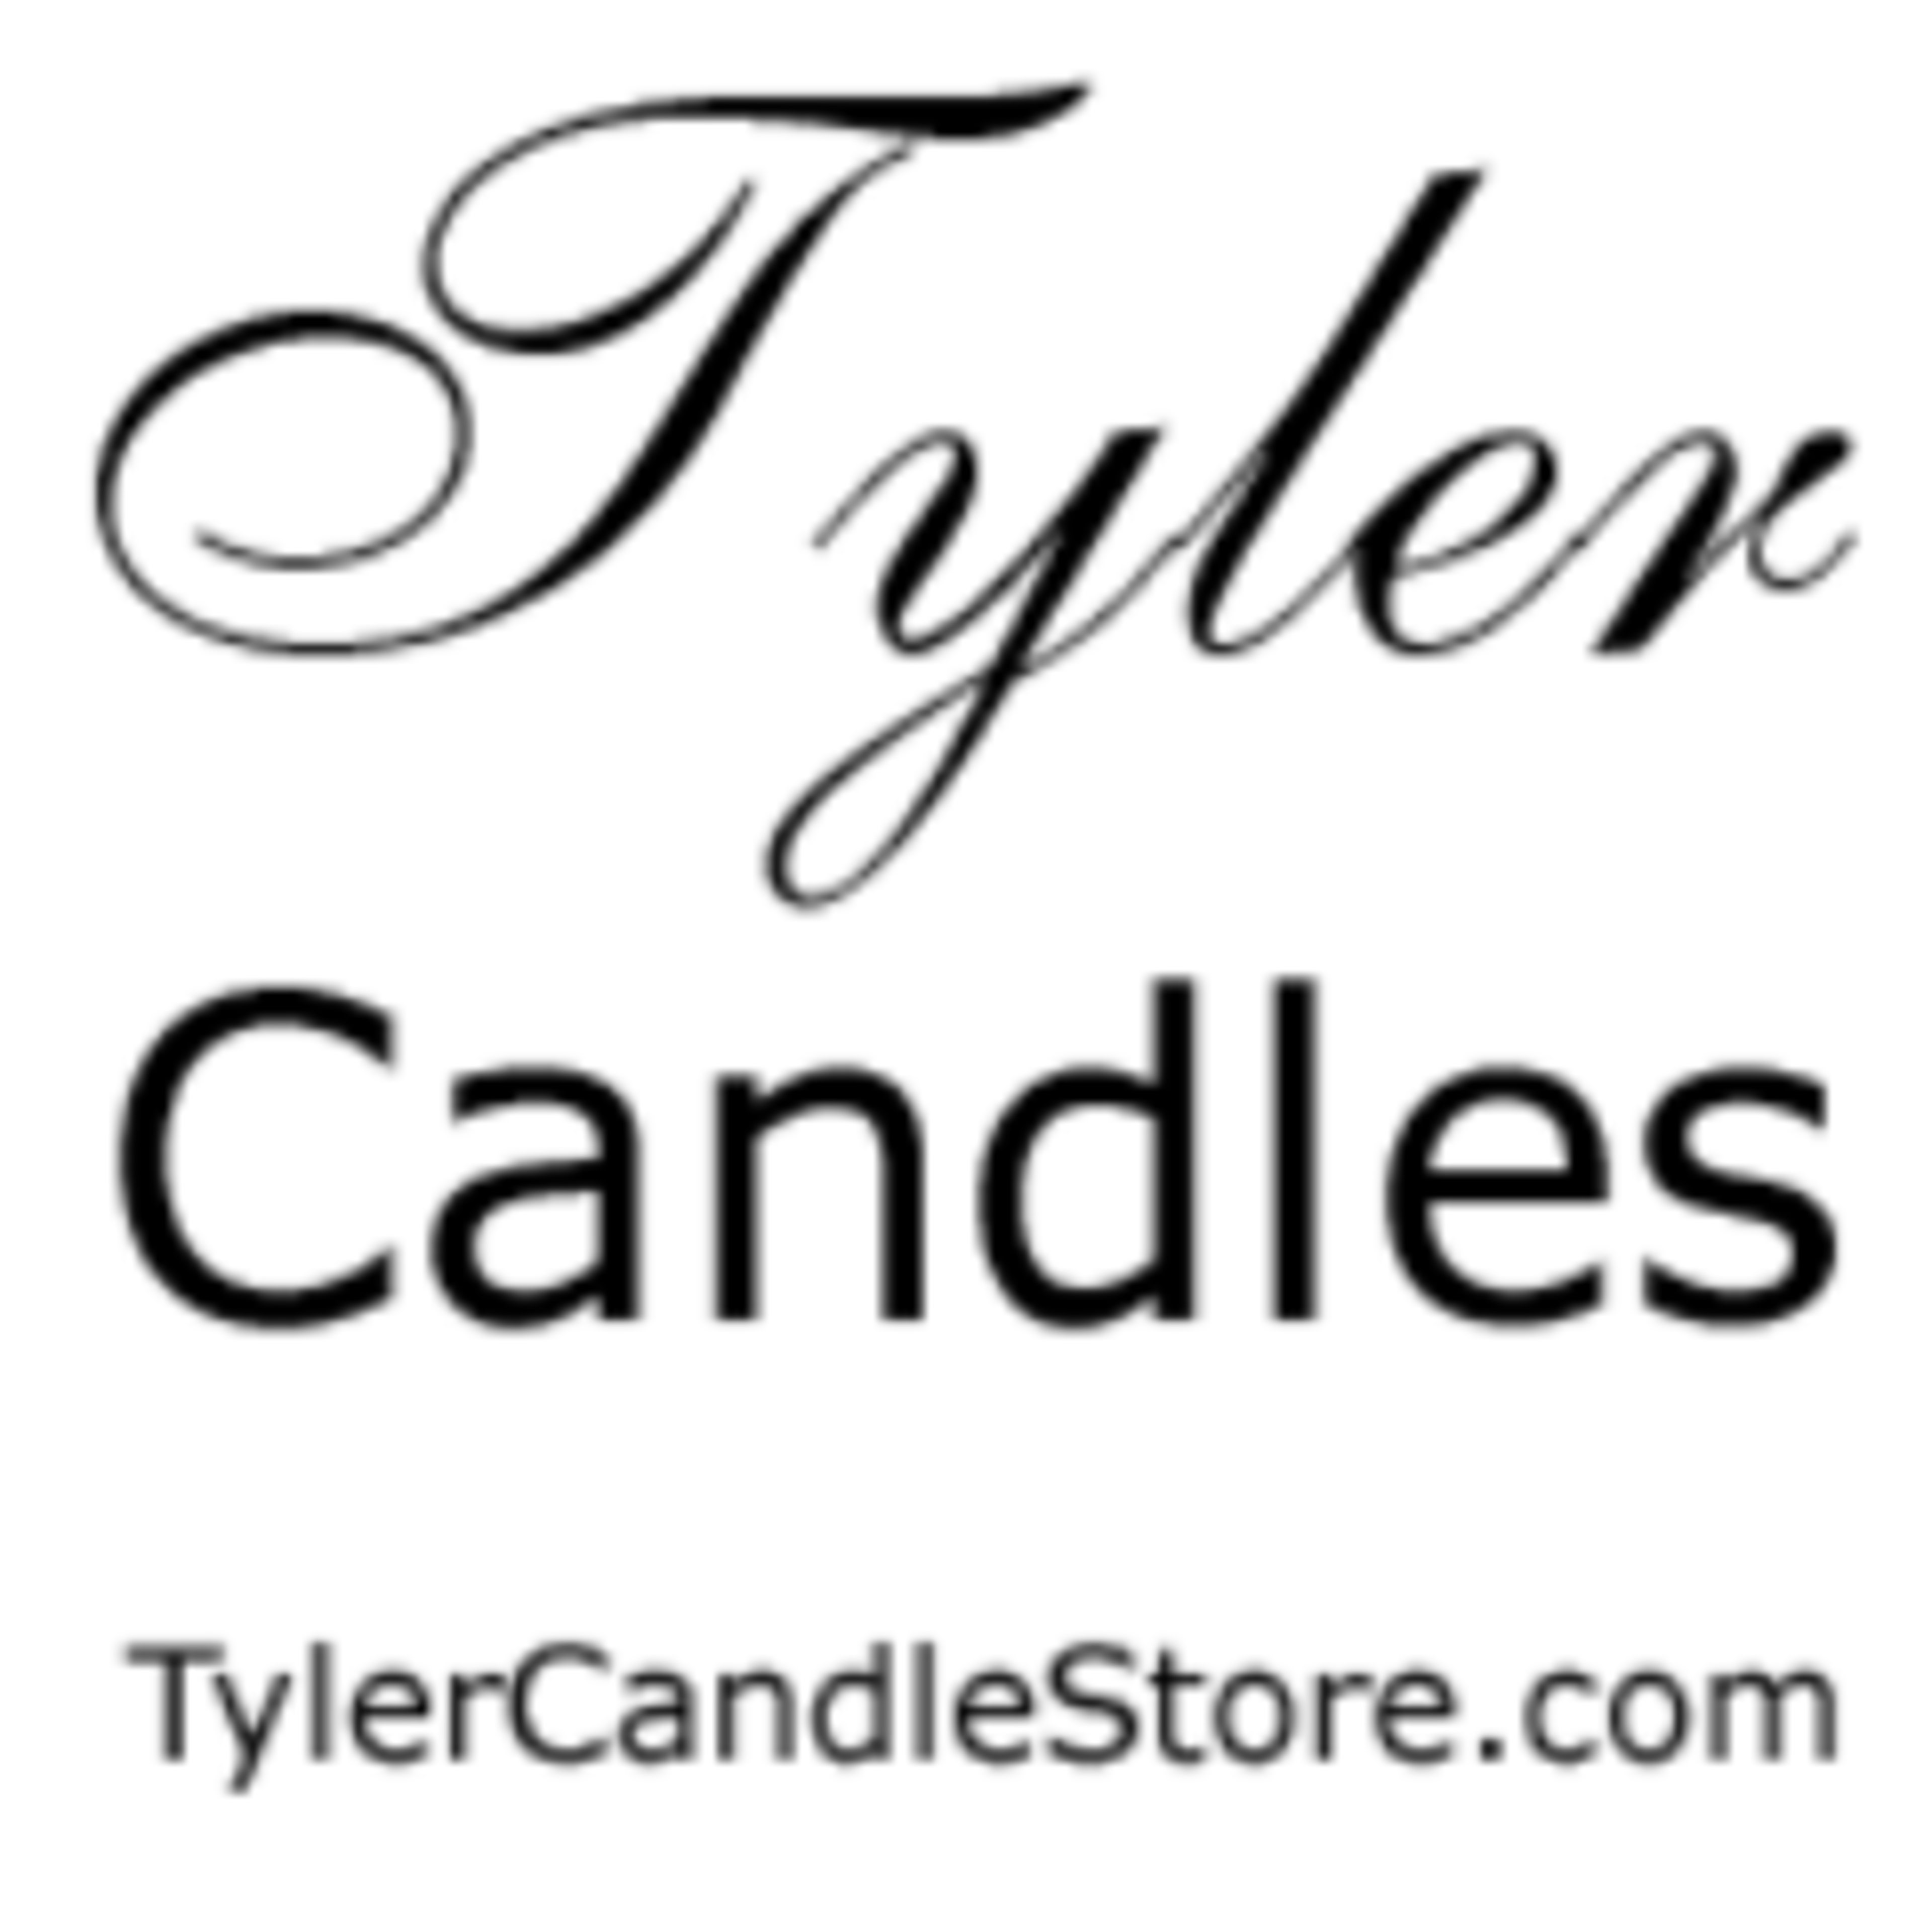 Tyler Candle StoreCode